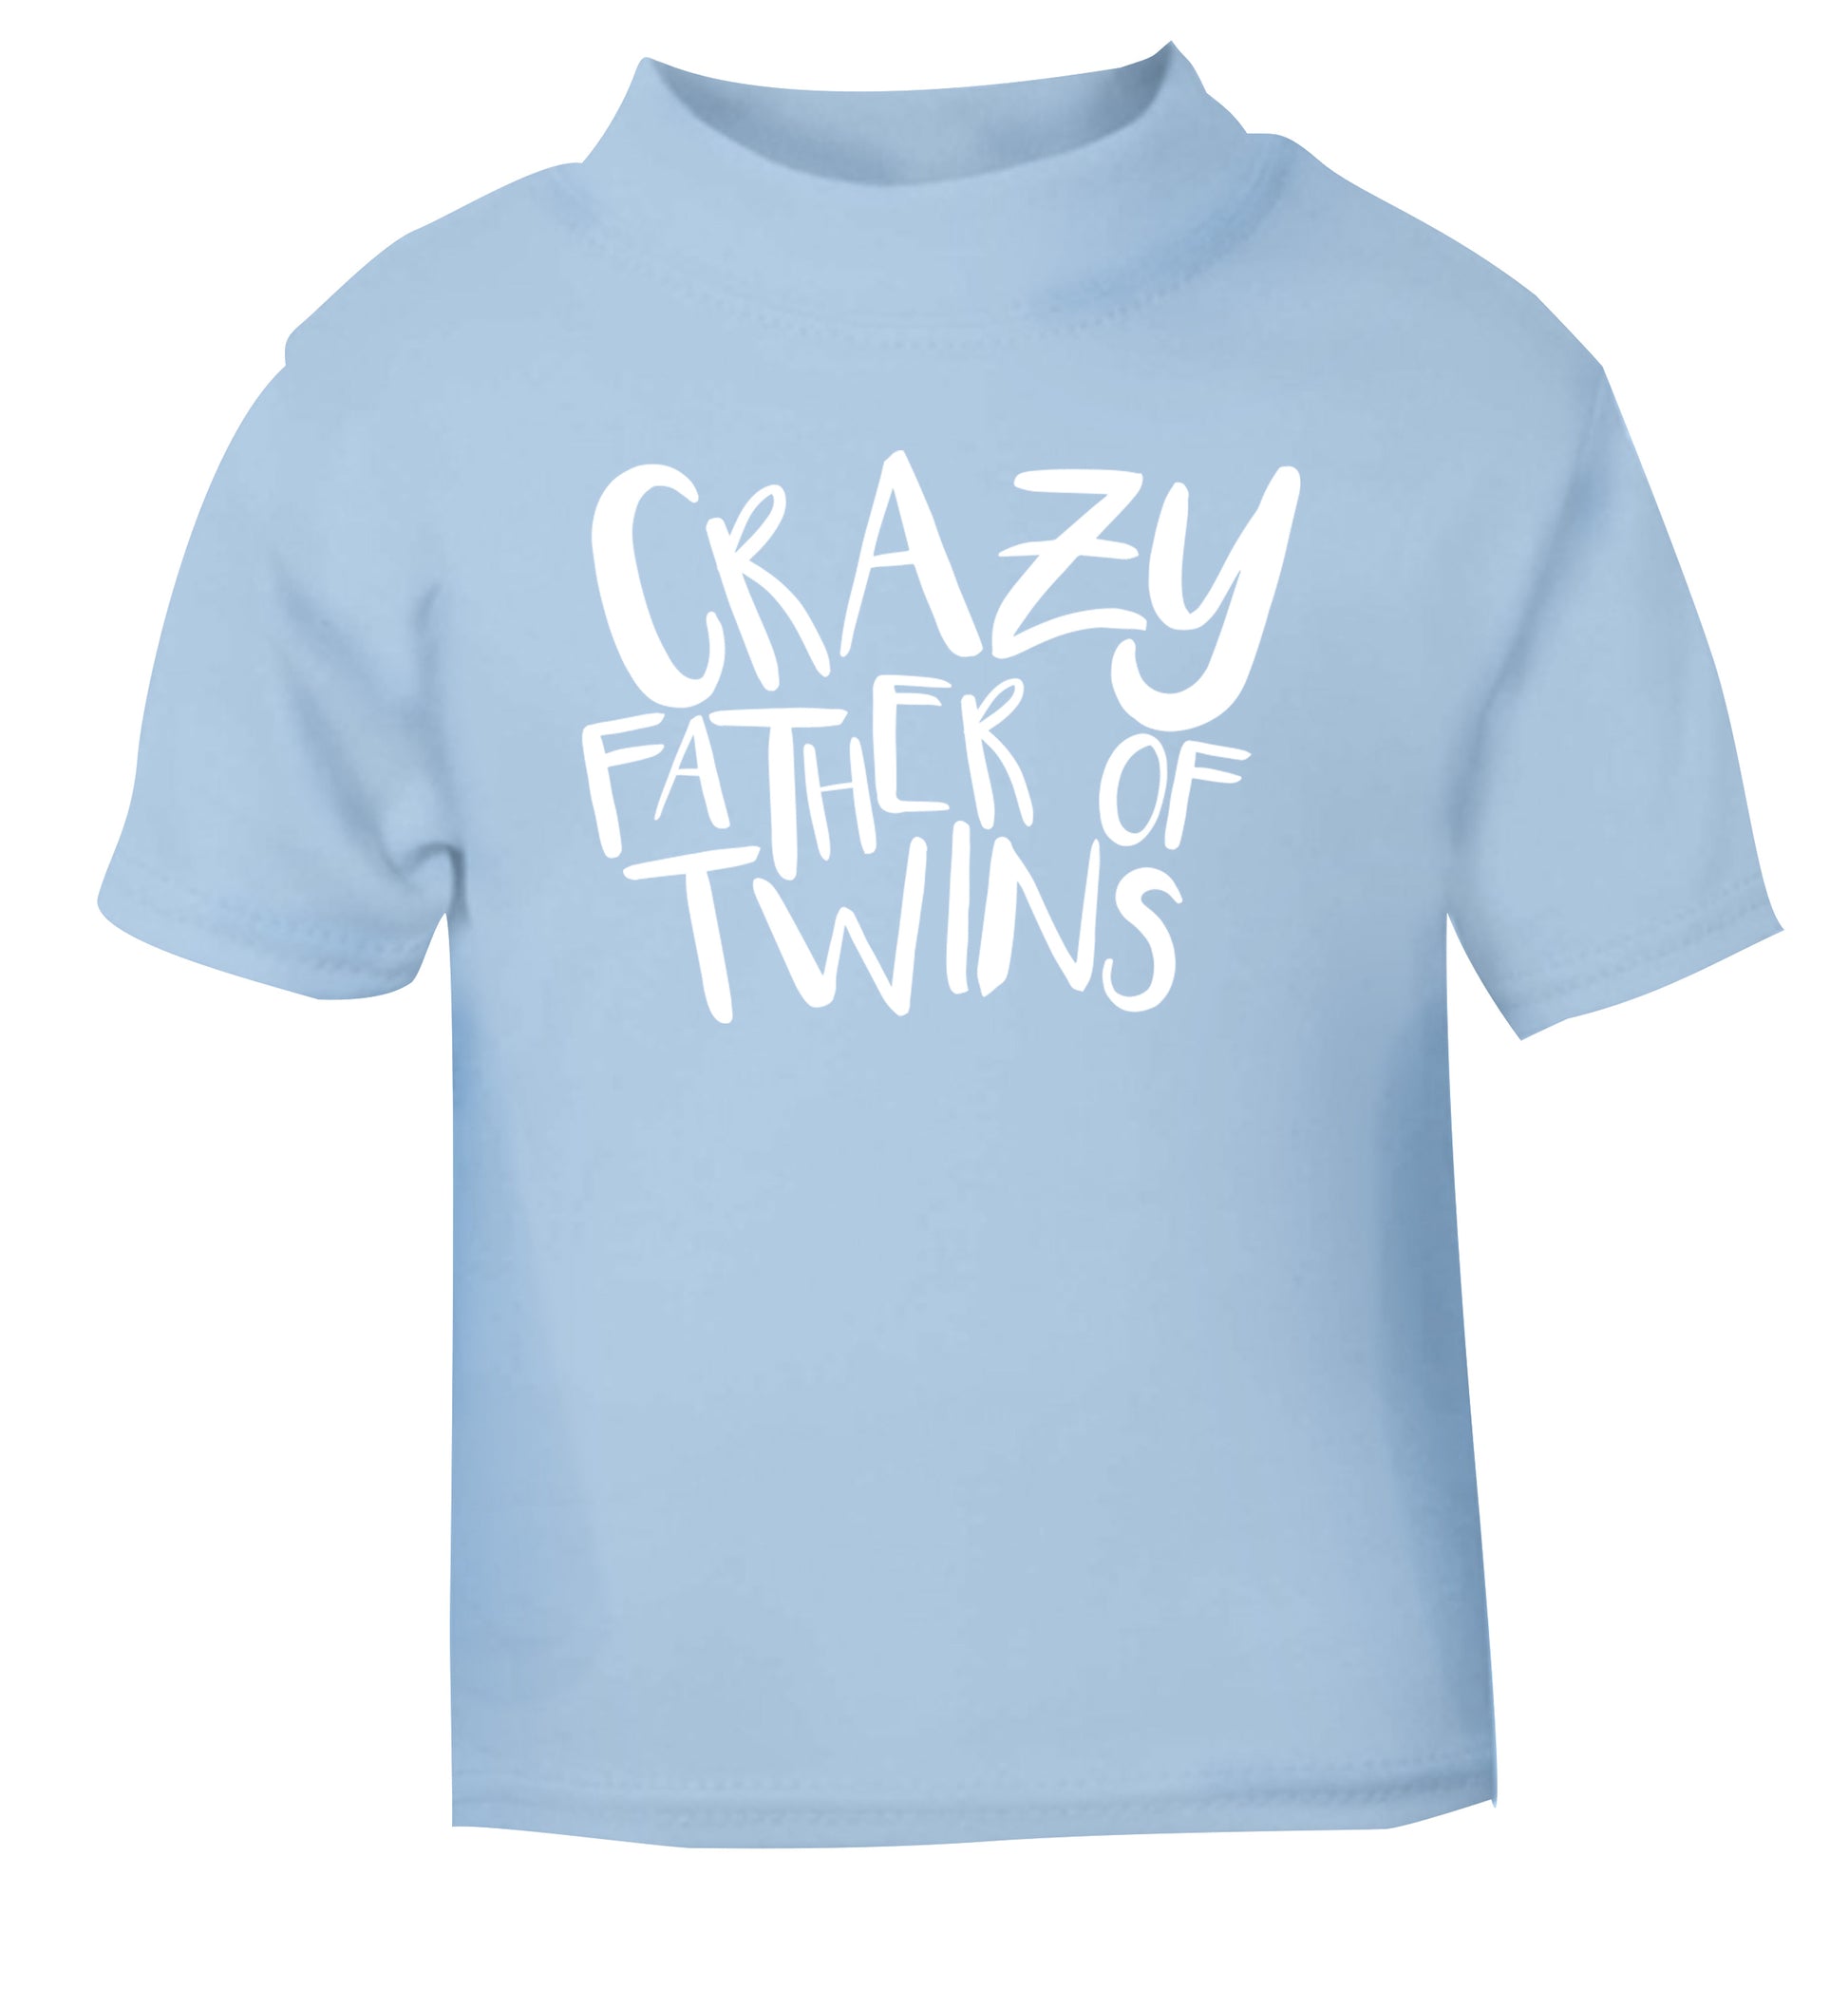 Crazy father of twins light blue Baby Toddler Tshirt 2 Years